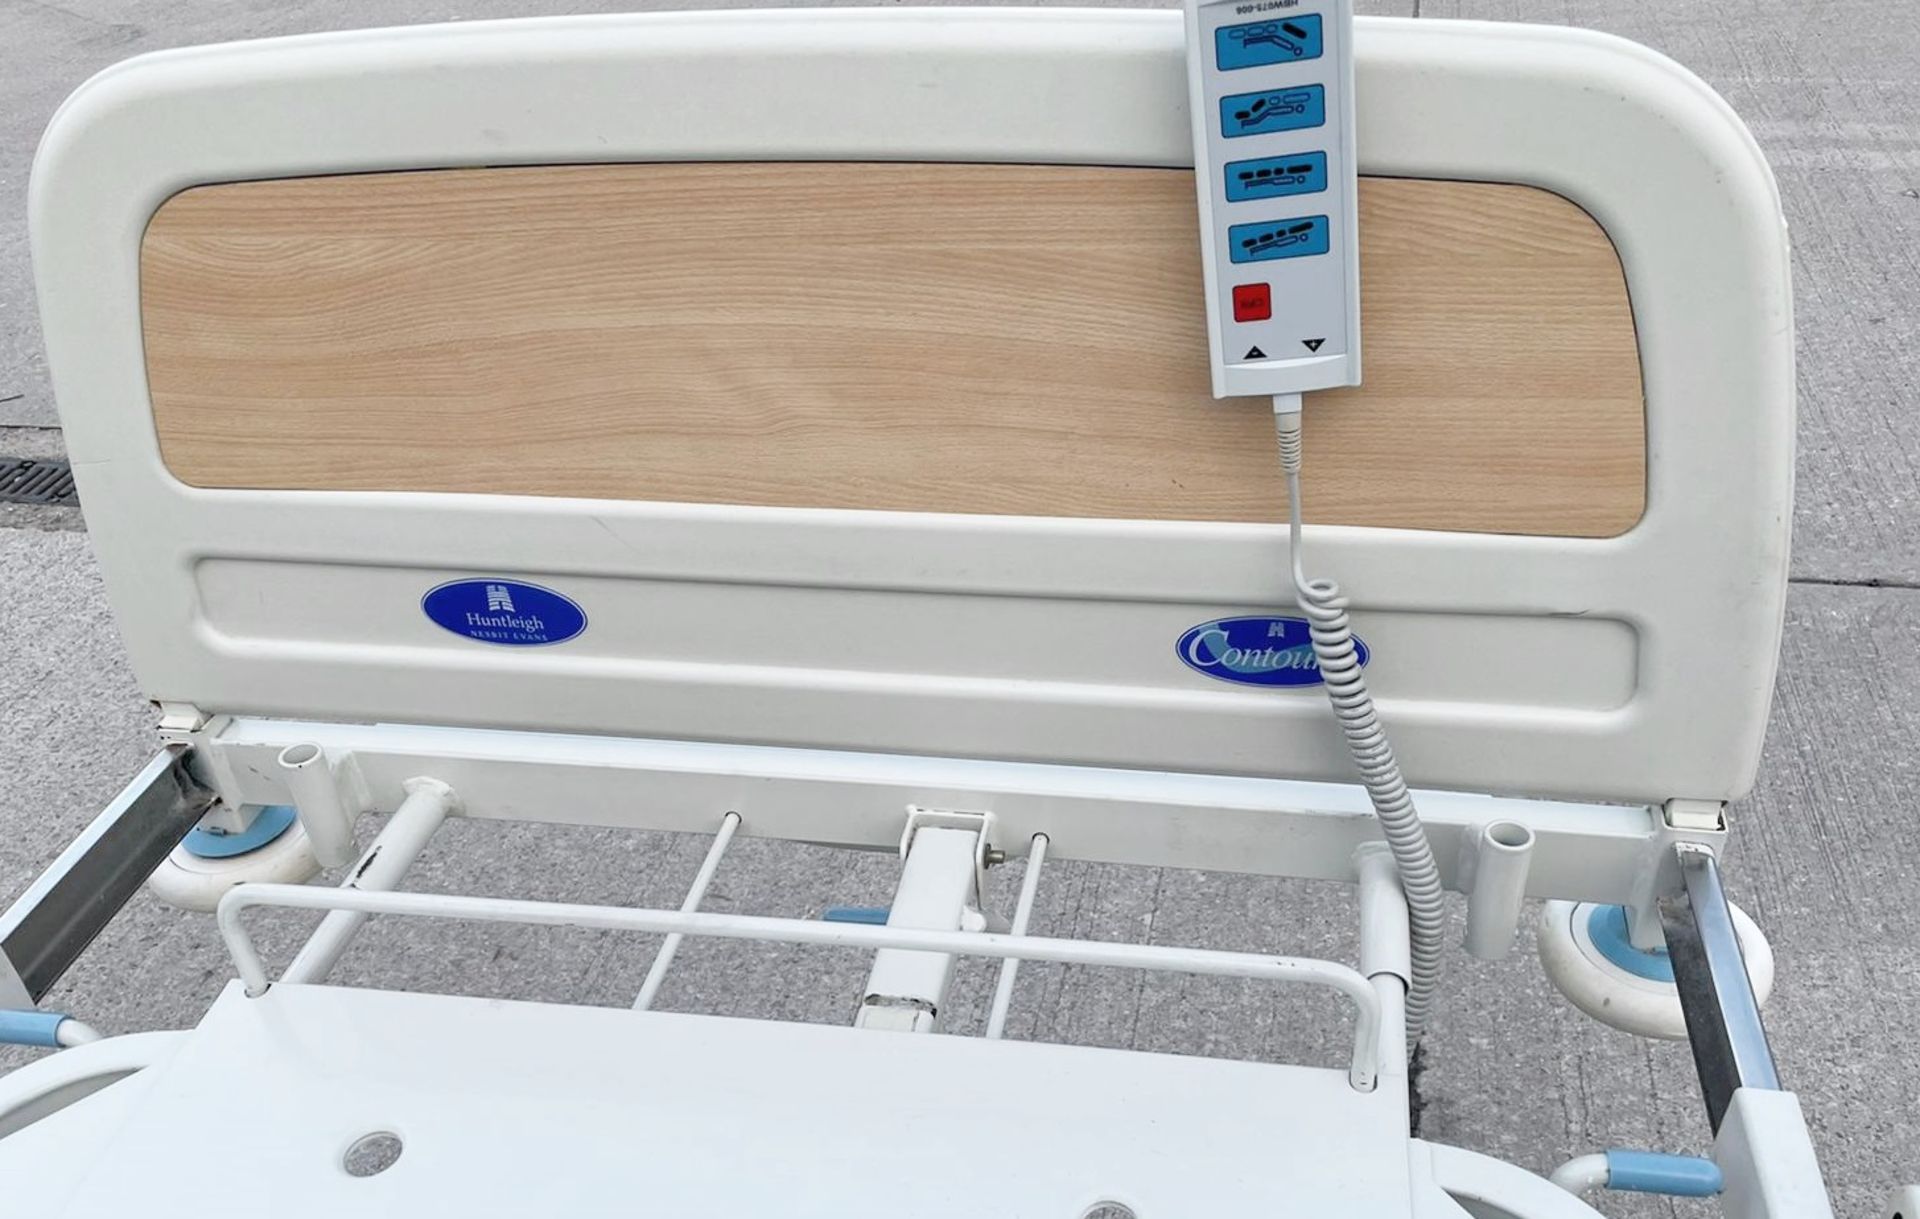 1 x Huntleigh CONTOURA Electric Hospital Bed - Features Rise/Fall 3-Way Profiling, Side Rails, - Image 12 of 13